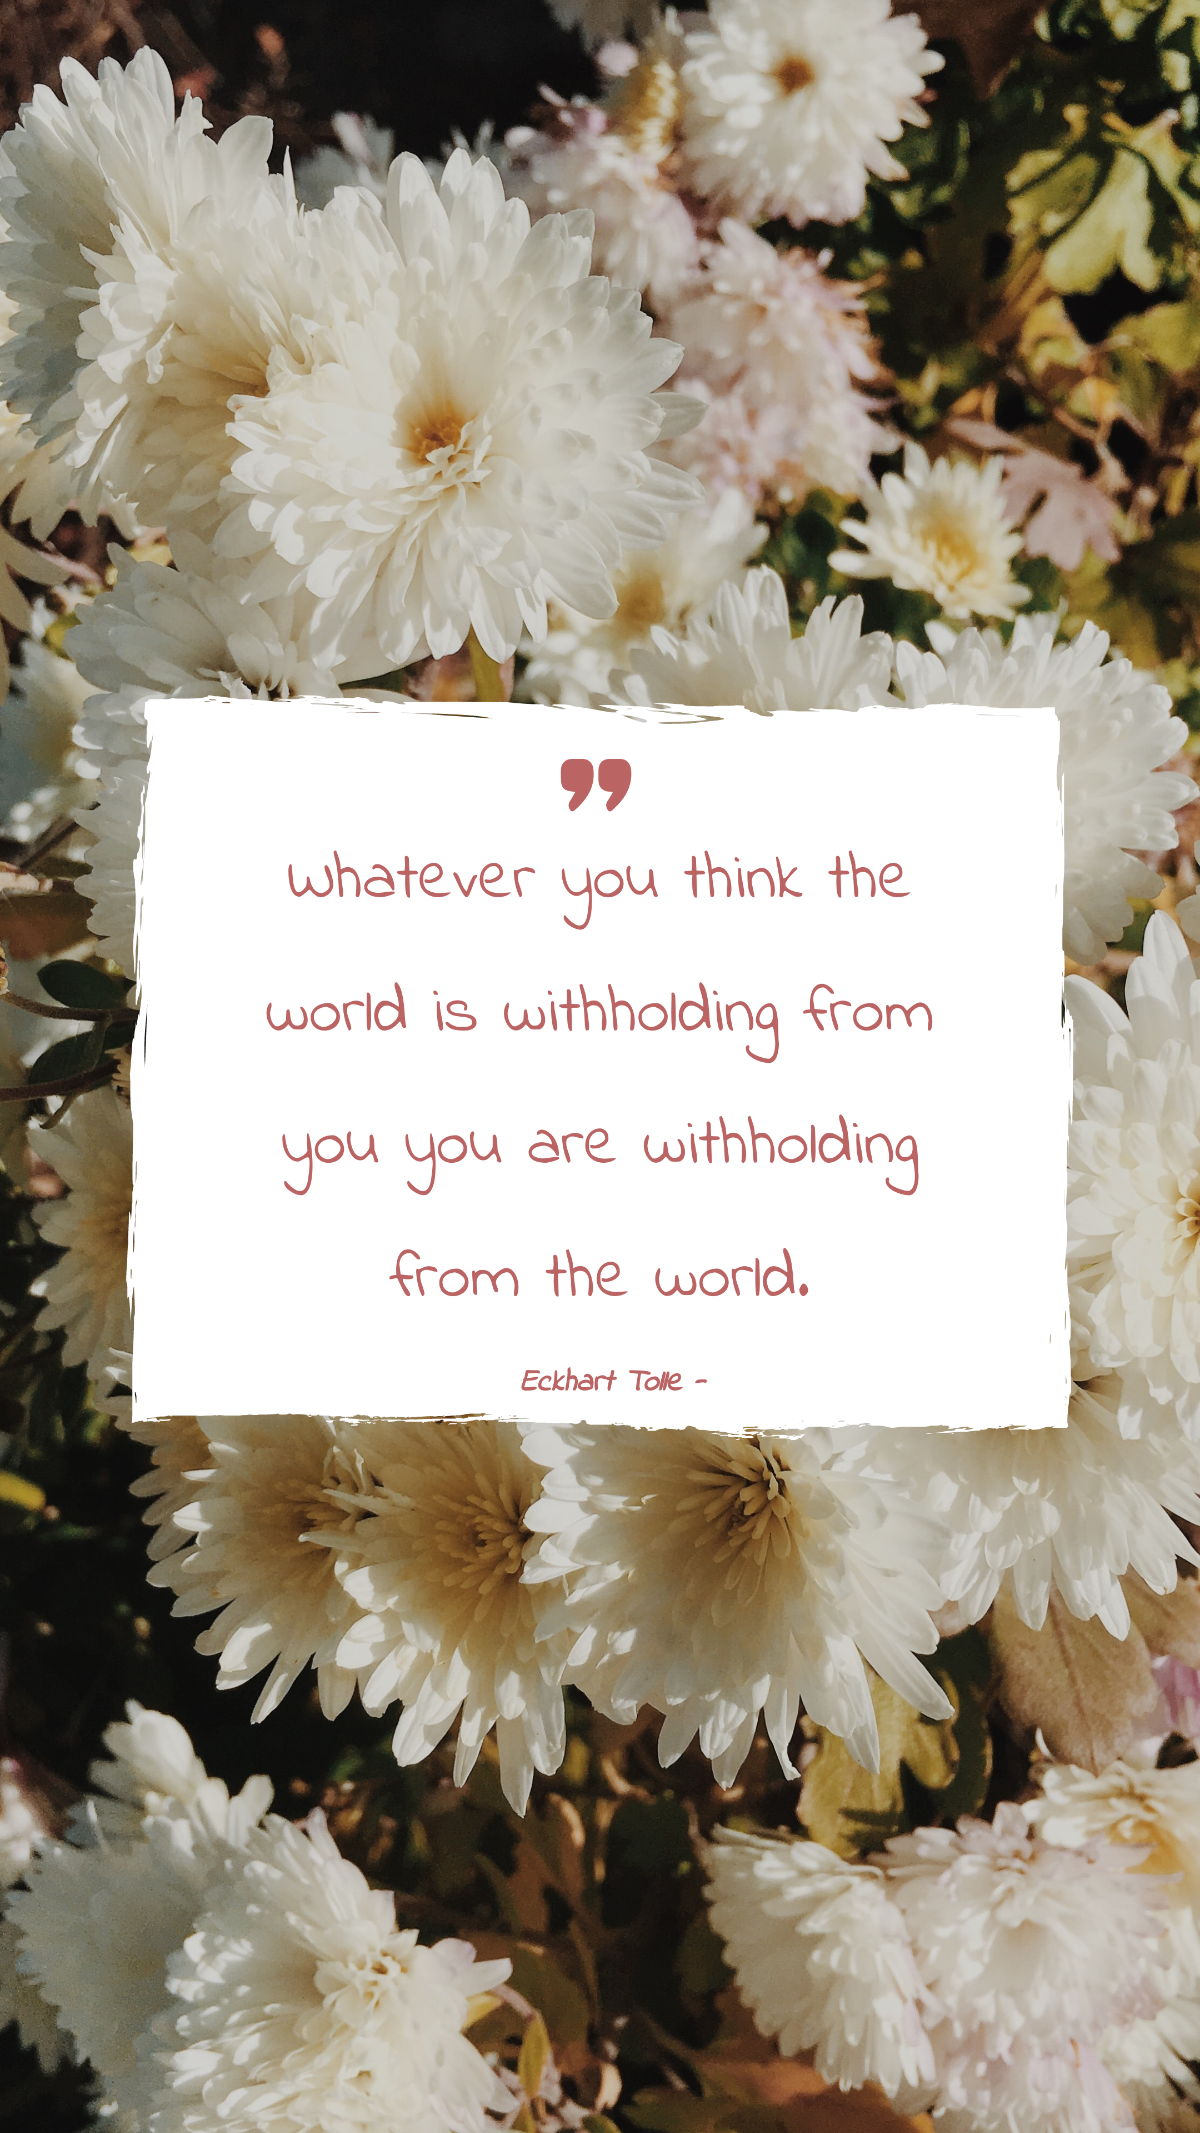 Eckhart Tolle - Whatever you think the world is withholding from you you are withholding from the world. Template